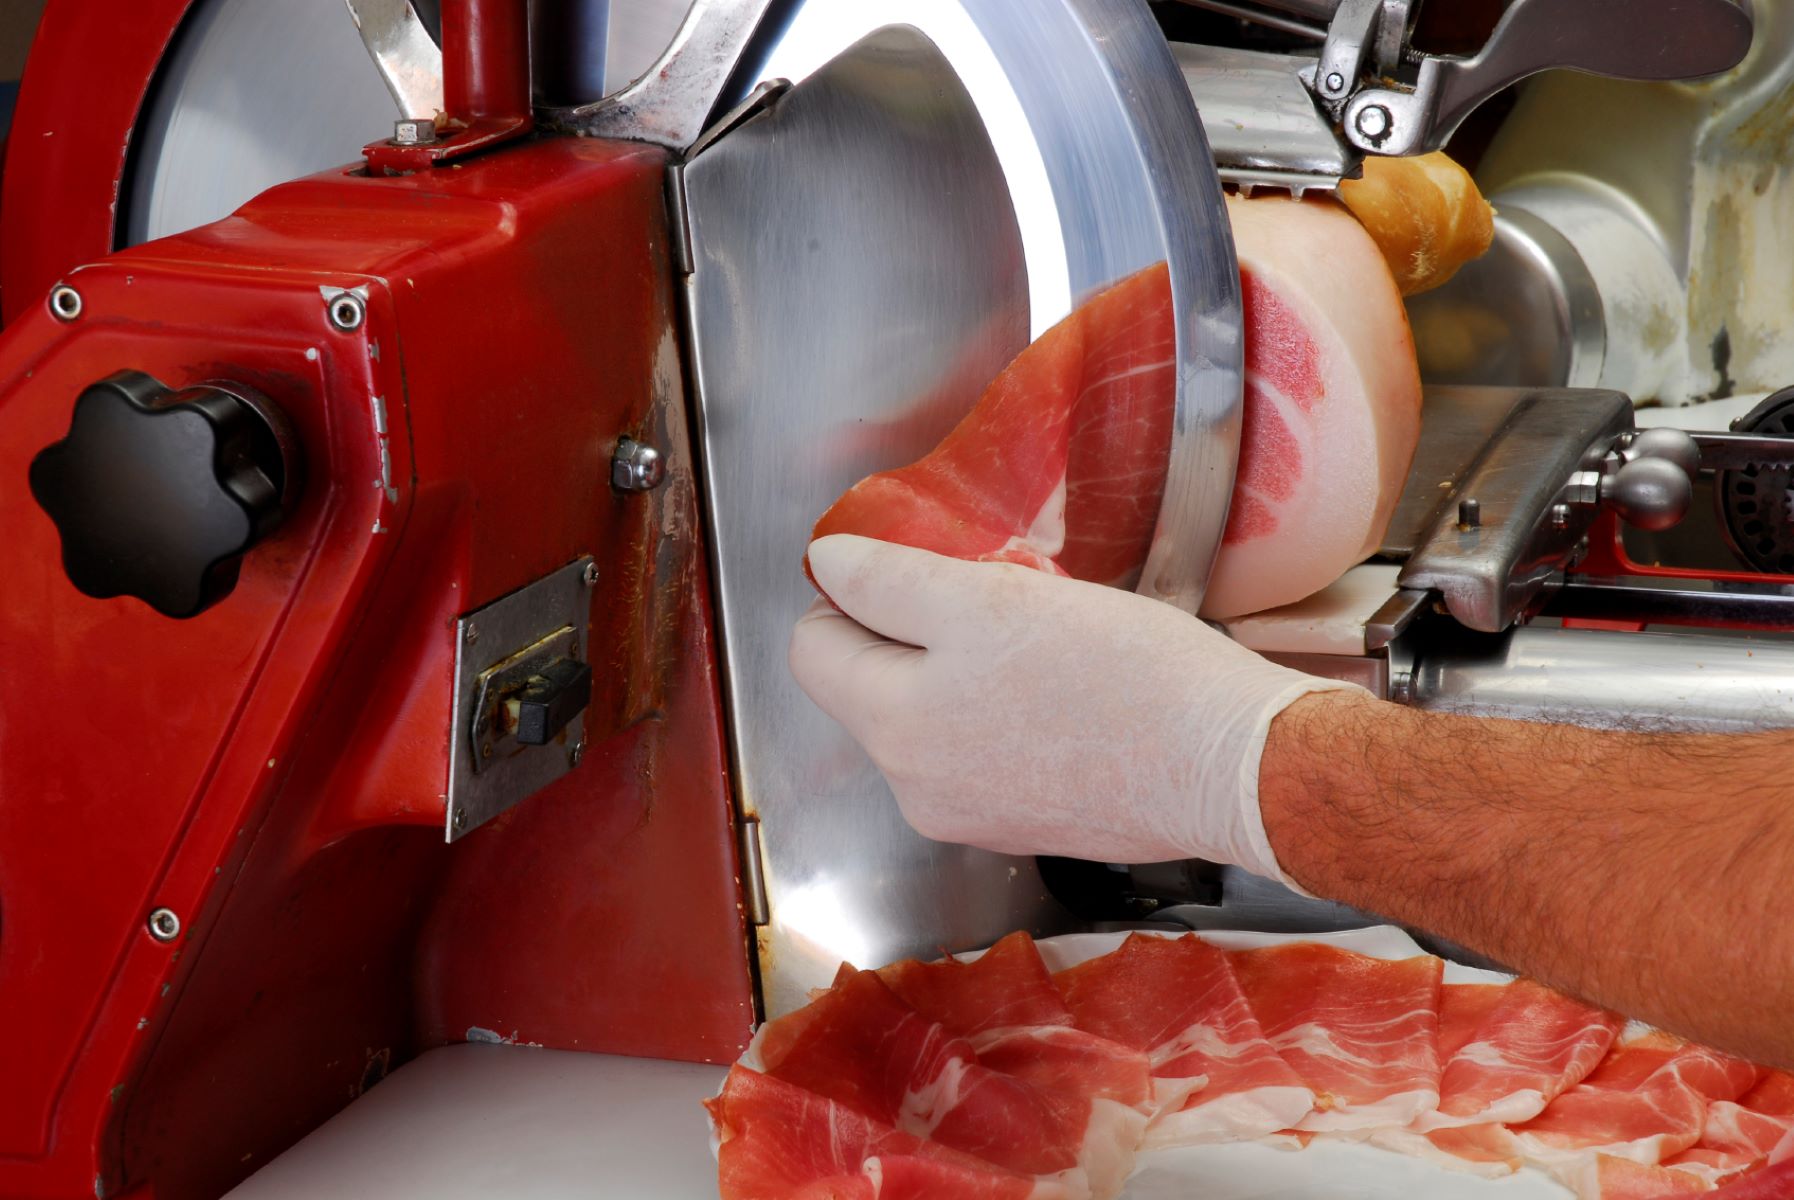 The Surprising Truth About How Often You Should Clean Your Meat Slicer